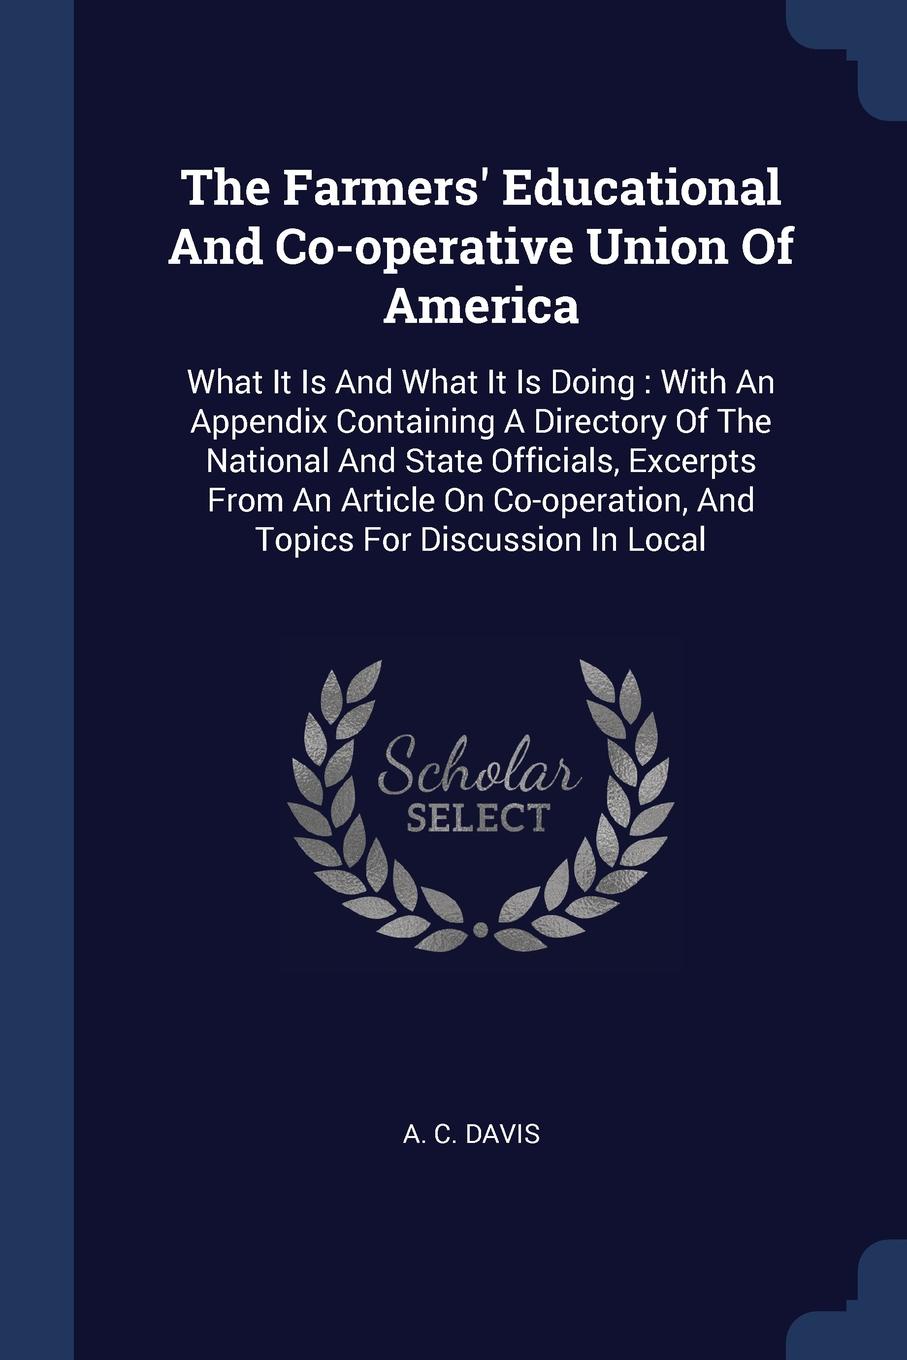 The Farmers. Educational And Co-operative Union Of America. What It Is And What It Is Doing : With An Appendix Containing A Directory Of The National And State Officials, Excerpts From An Article On Co-operation, And Topics For Discussion In Local